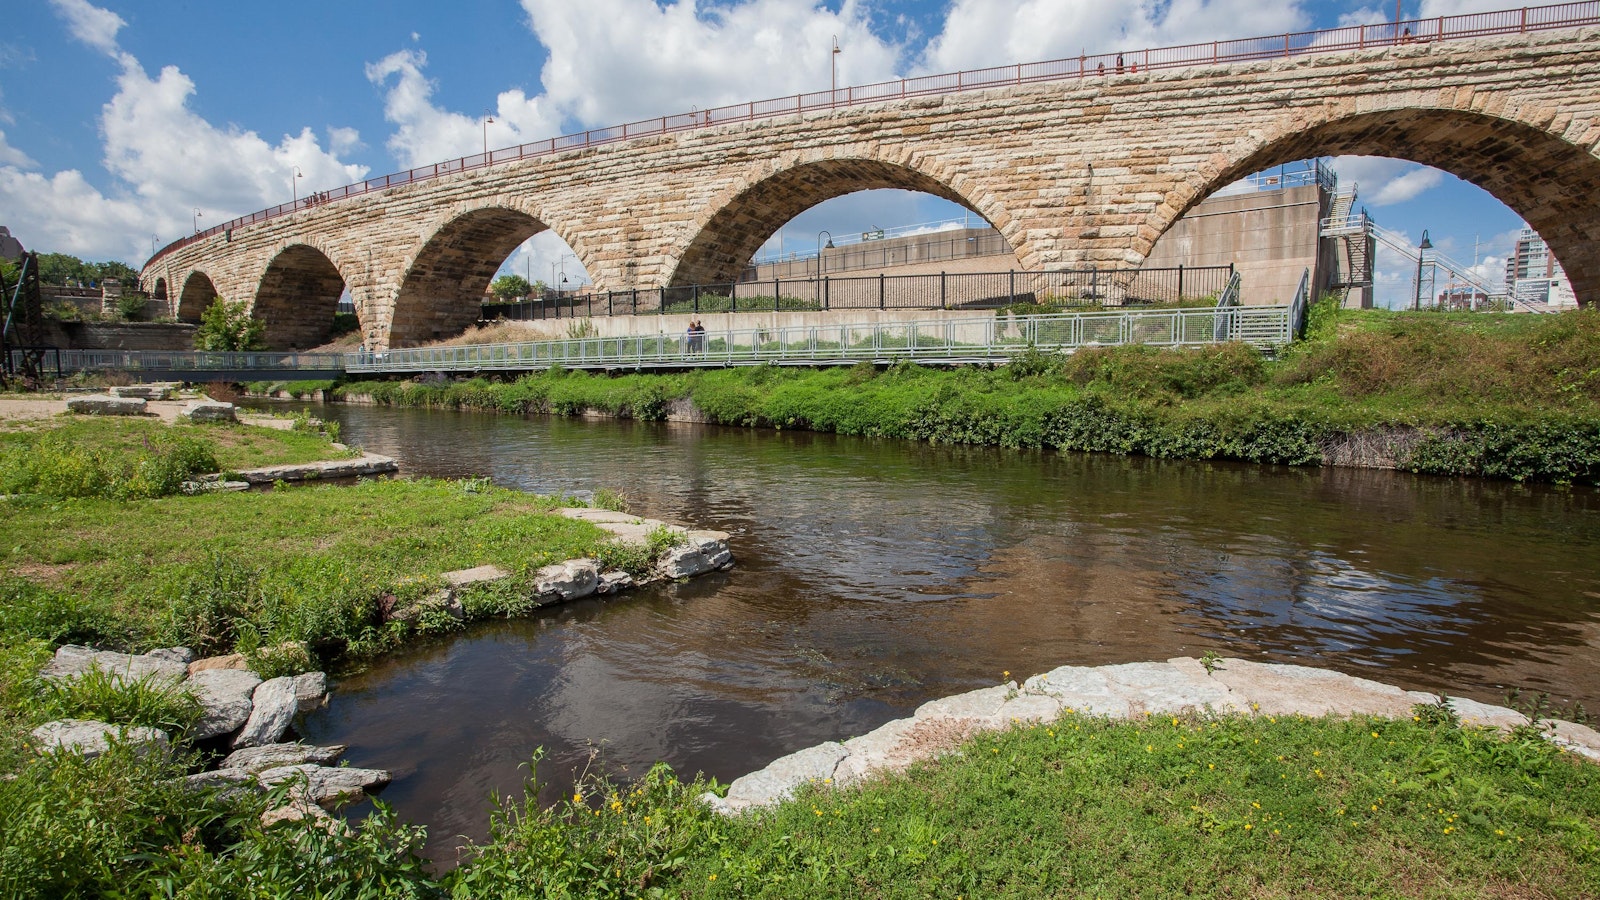 stone arched overpass along a river